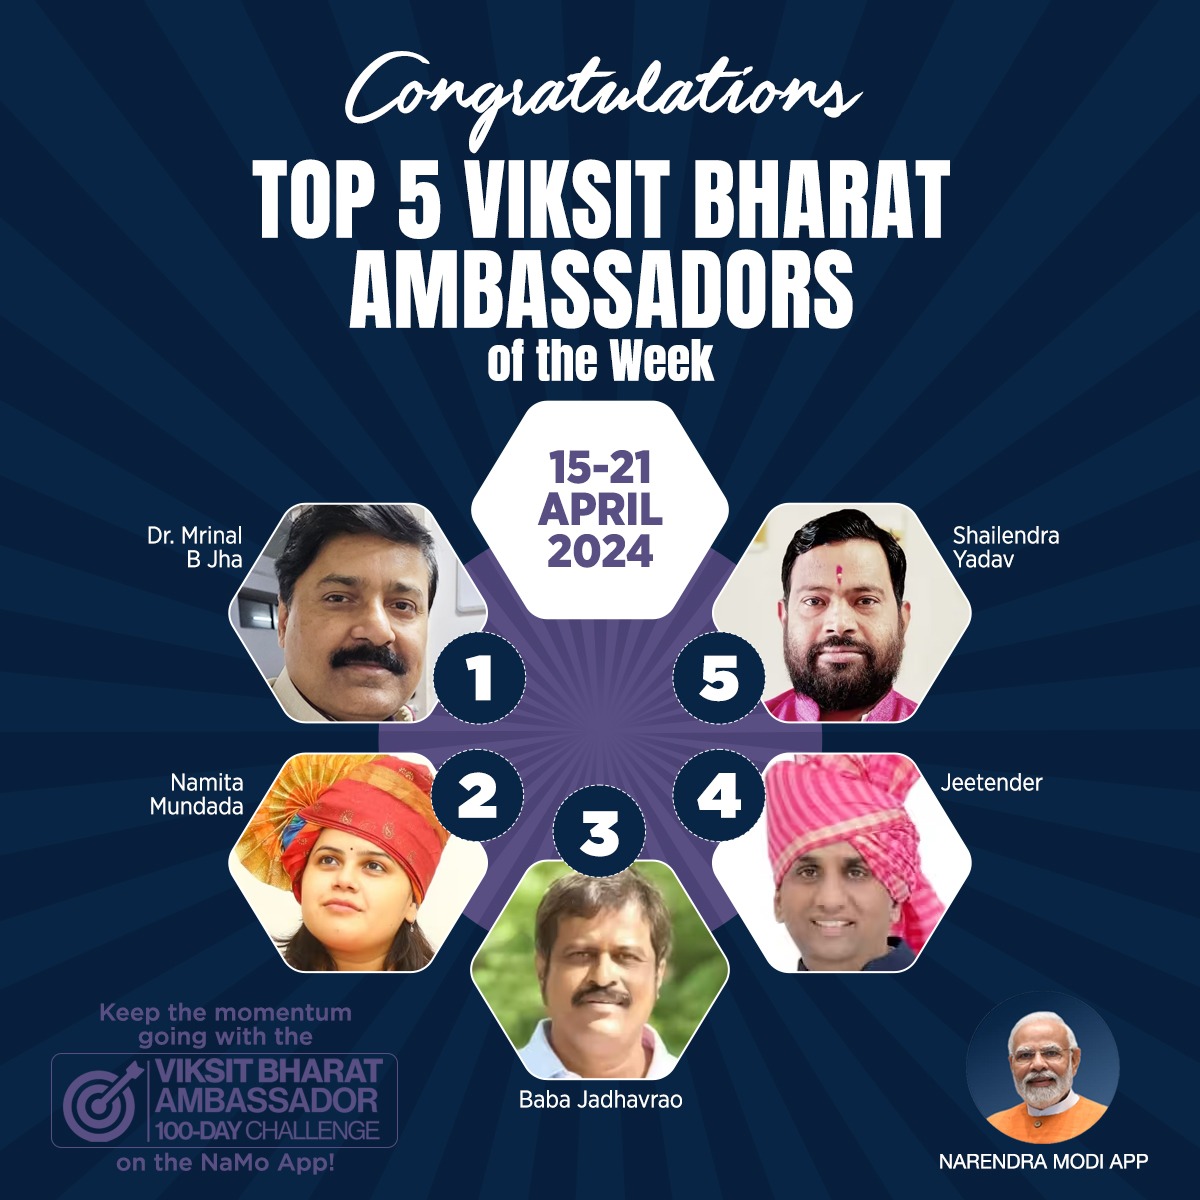 Congratulations to the Top 5 Viksit Bharat Ambassadors of the week! Your dedication to realizing PM @narendramodi's vision for building a Viksit Bharat is commendable! Take up the #ViksitBharatAmbassador 100-day Challenge on the NaMo App now: narendramodi.in/ViksitBharatAm…